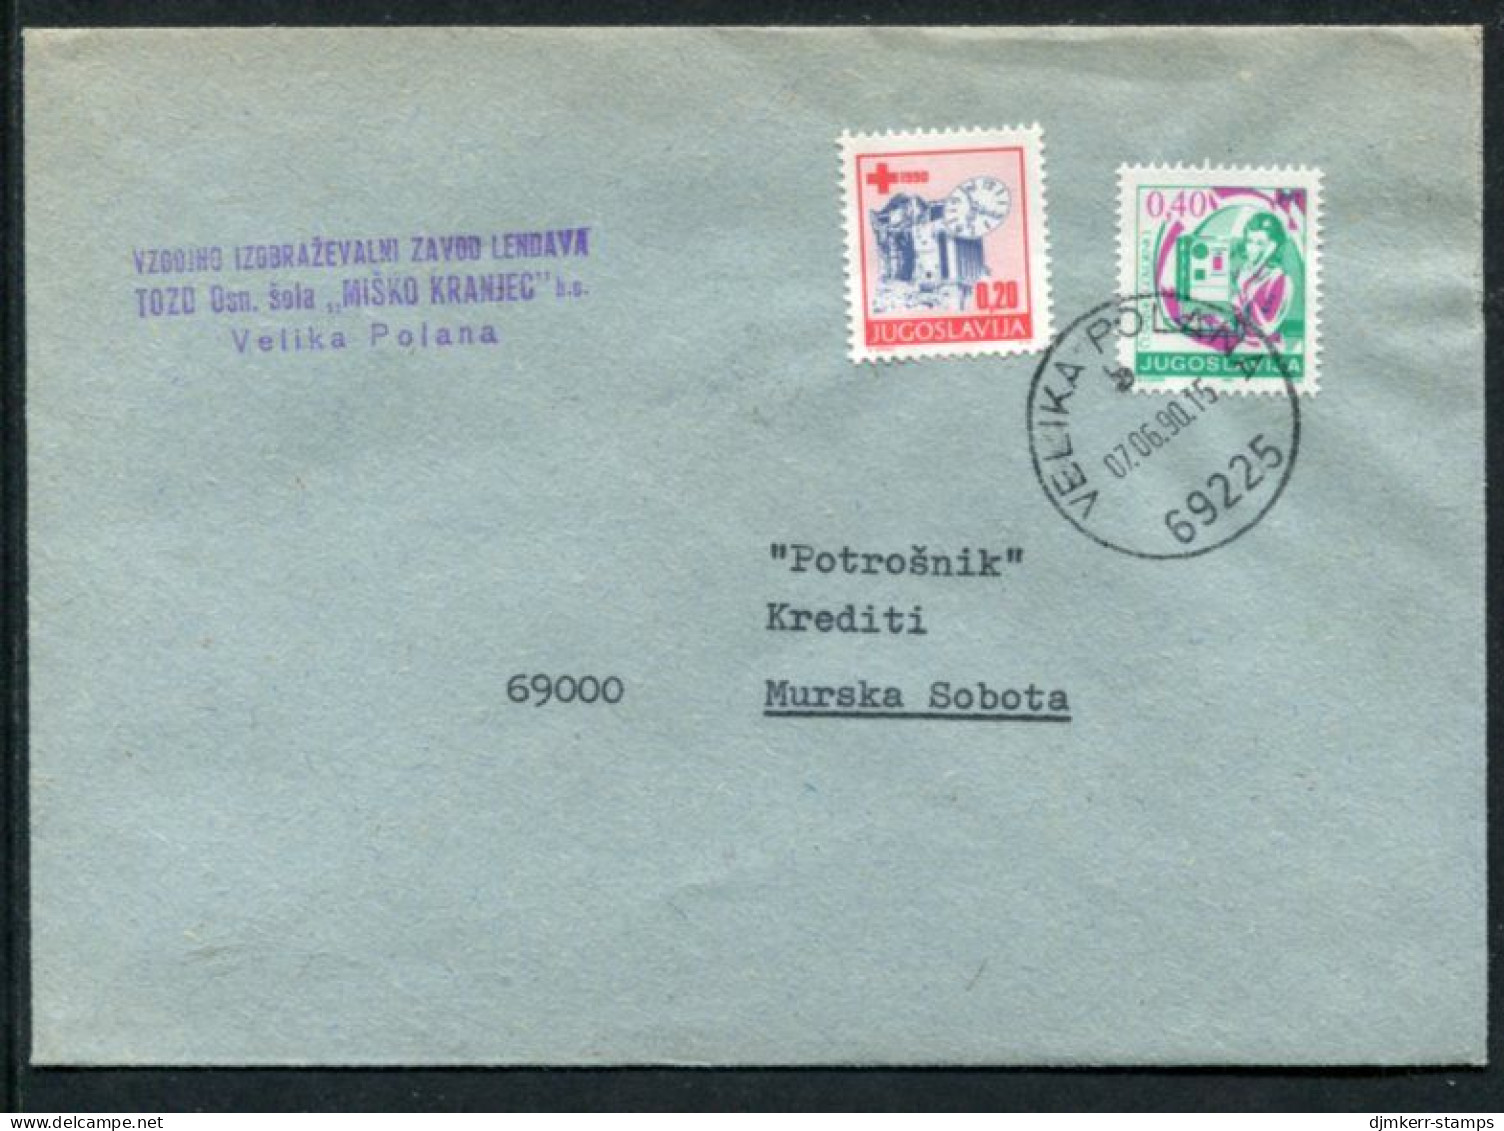 YUGOSLAVIA 1990 Commercial Cover With Solidarity Week 0.20 D.tax (used In Serbia Only).  Michel ZZM 186 - Charity Issues